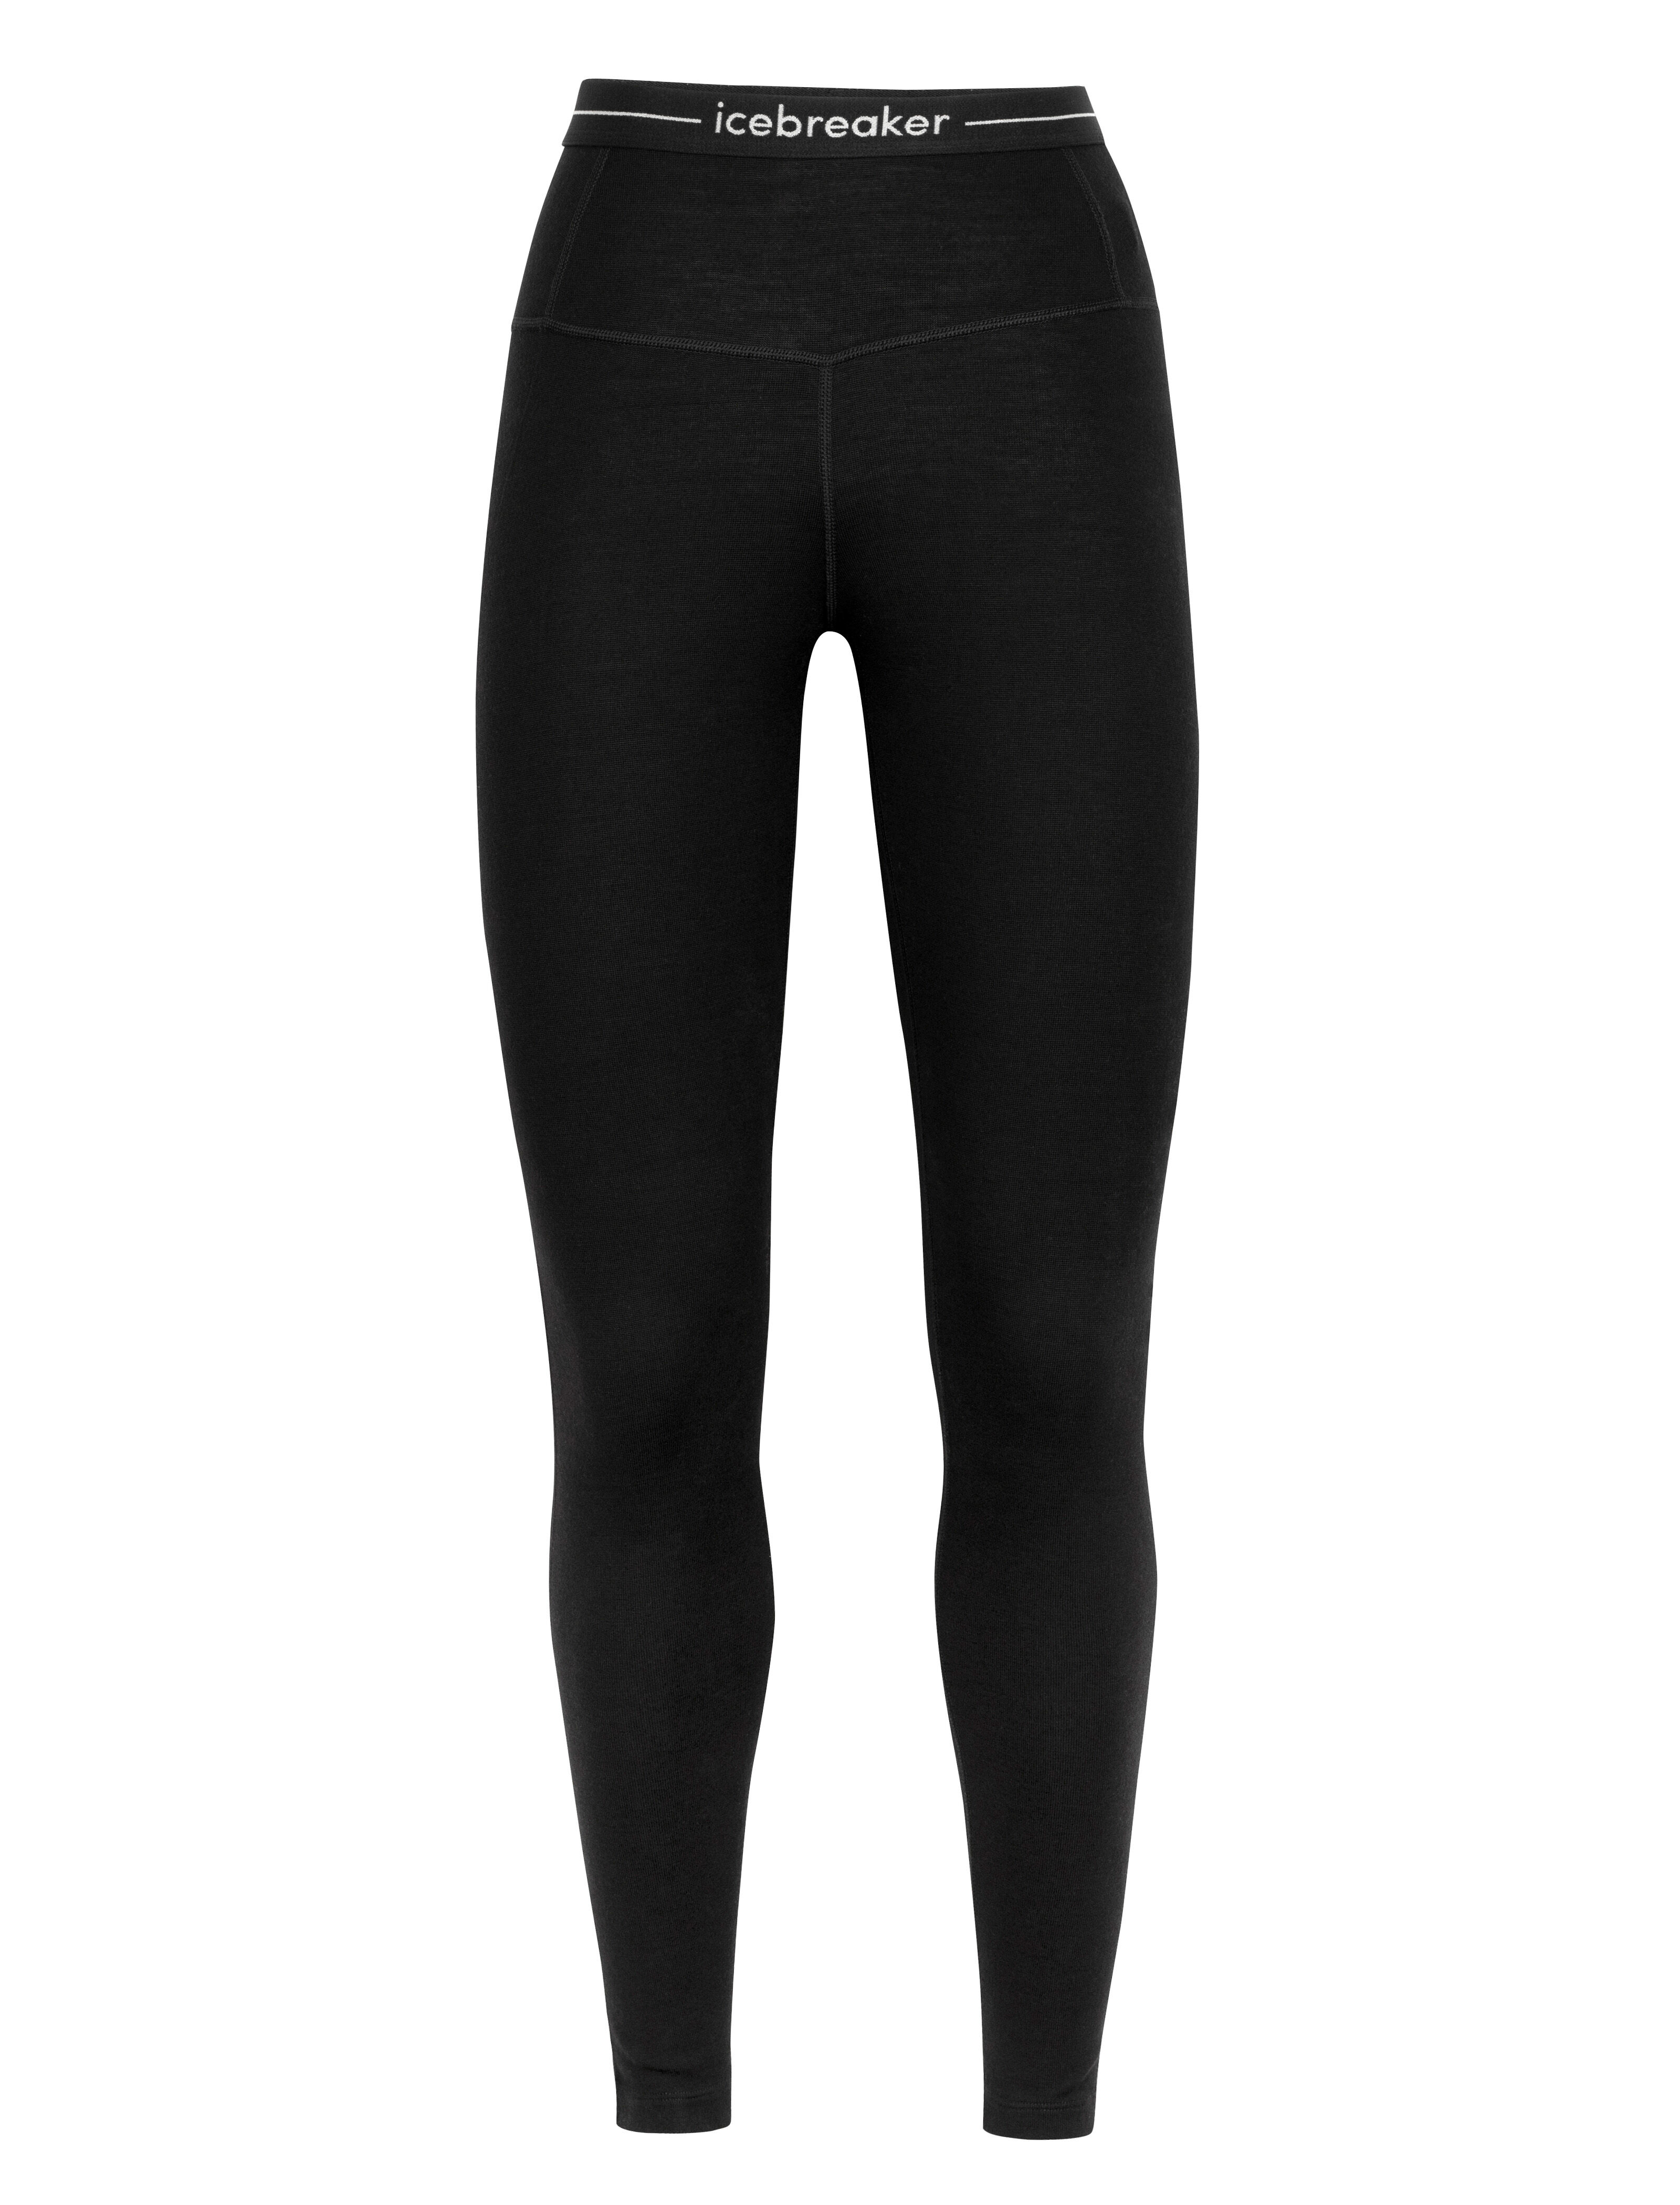 Thermal Leggings: Top 10 Shocking Facts for a Cosy Winter!